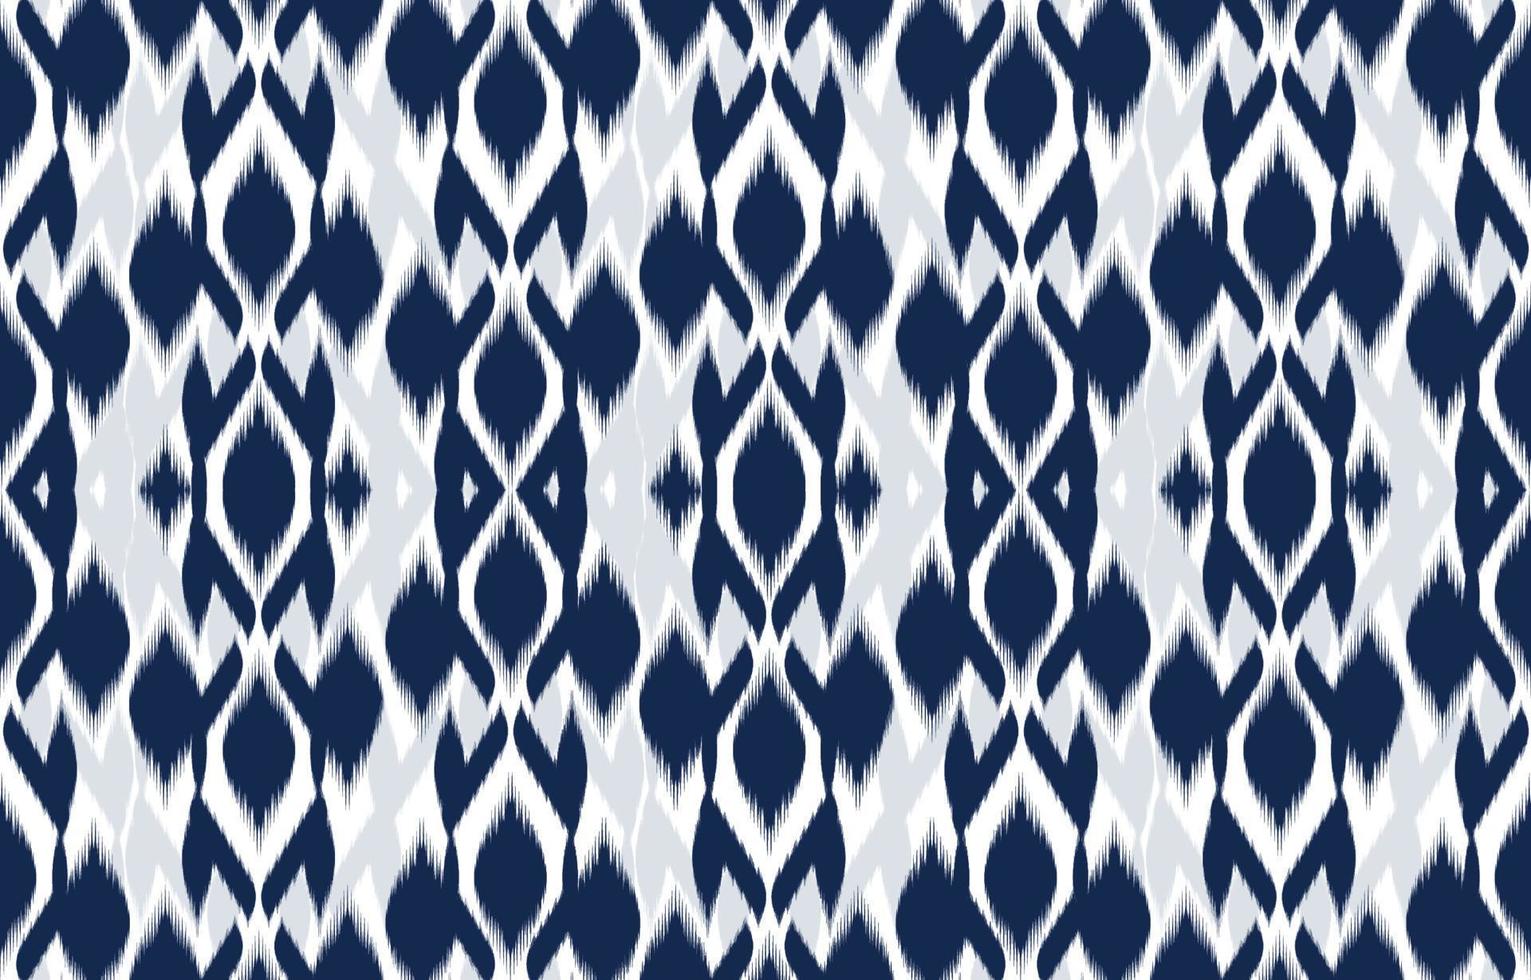 Ethnic Abstract Blue color. Seamless pattern in tribal, folk embroidery, and Mexican style. Aztec geometric art ornament print.Design for carpet, wallpaper, clothing, wrapping, fabric, cover, textile vector